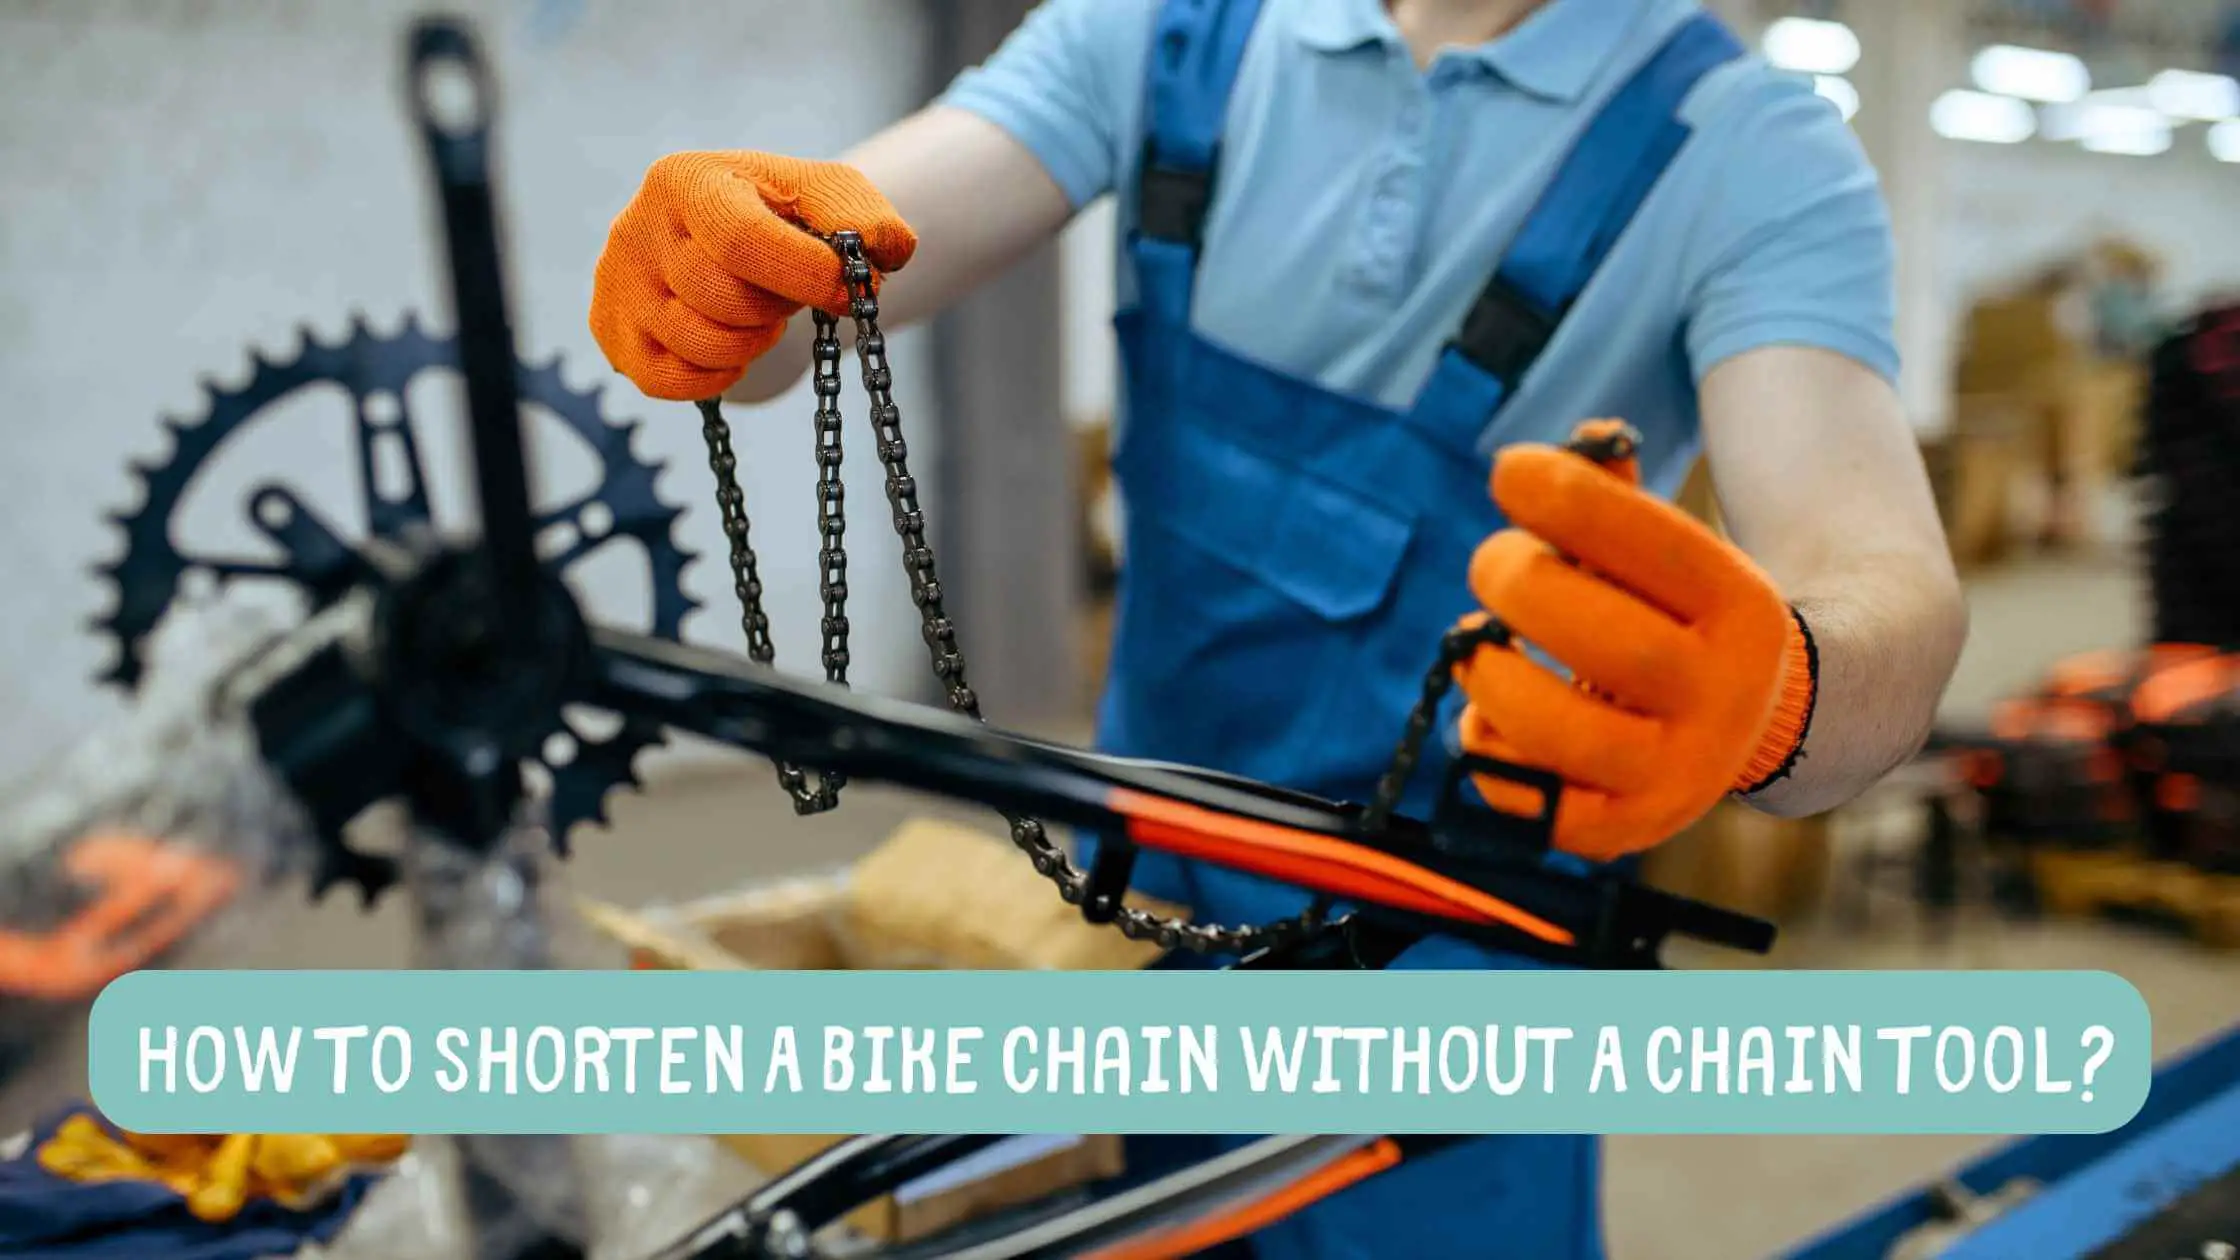 How to shorten a bike chain without a chain tool